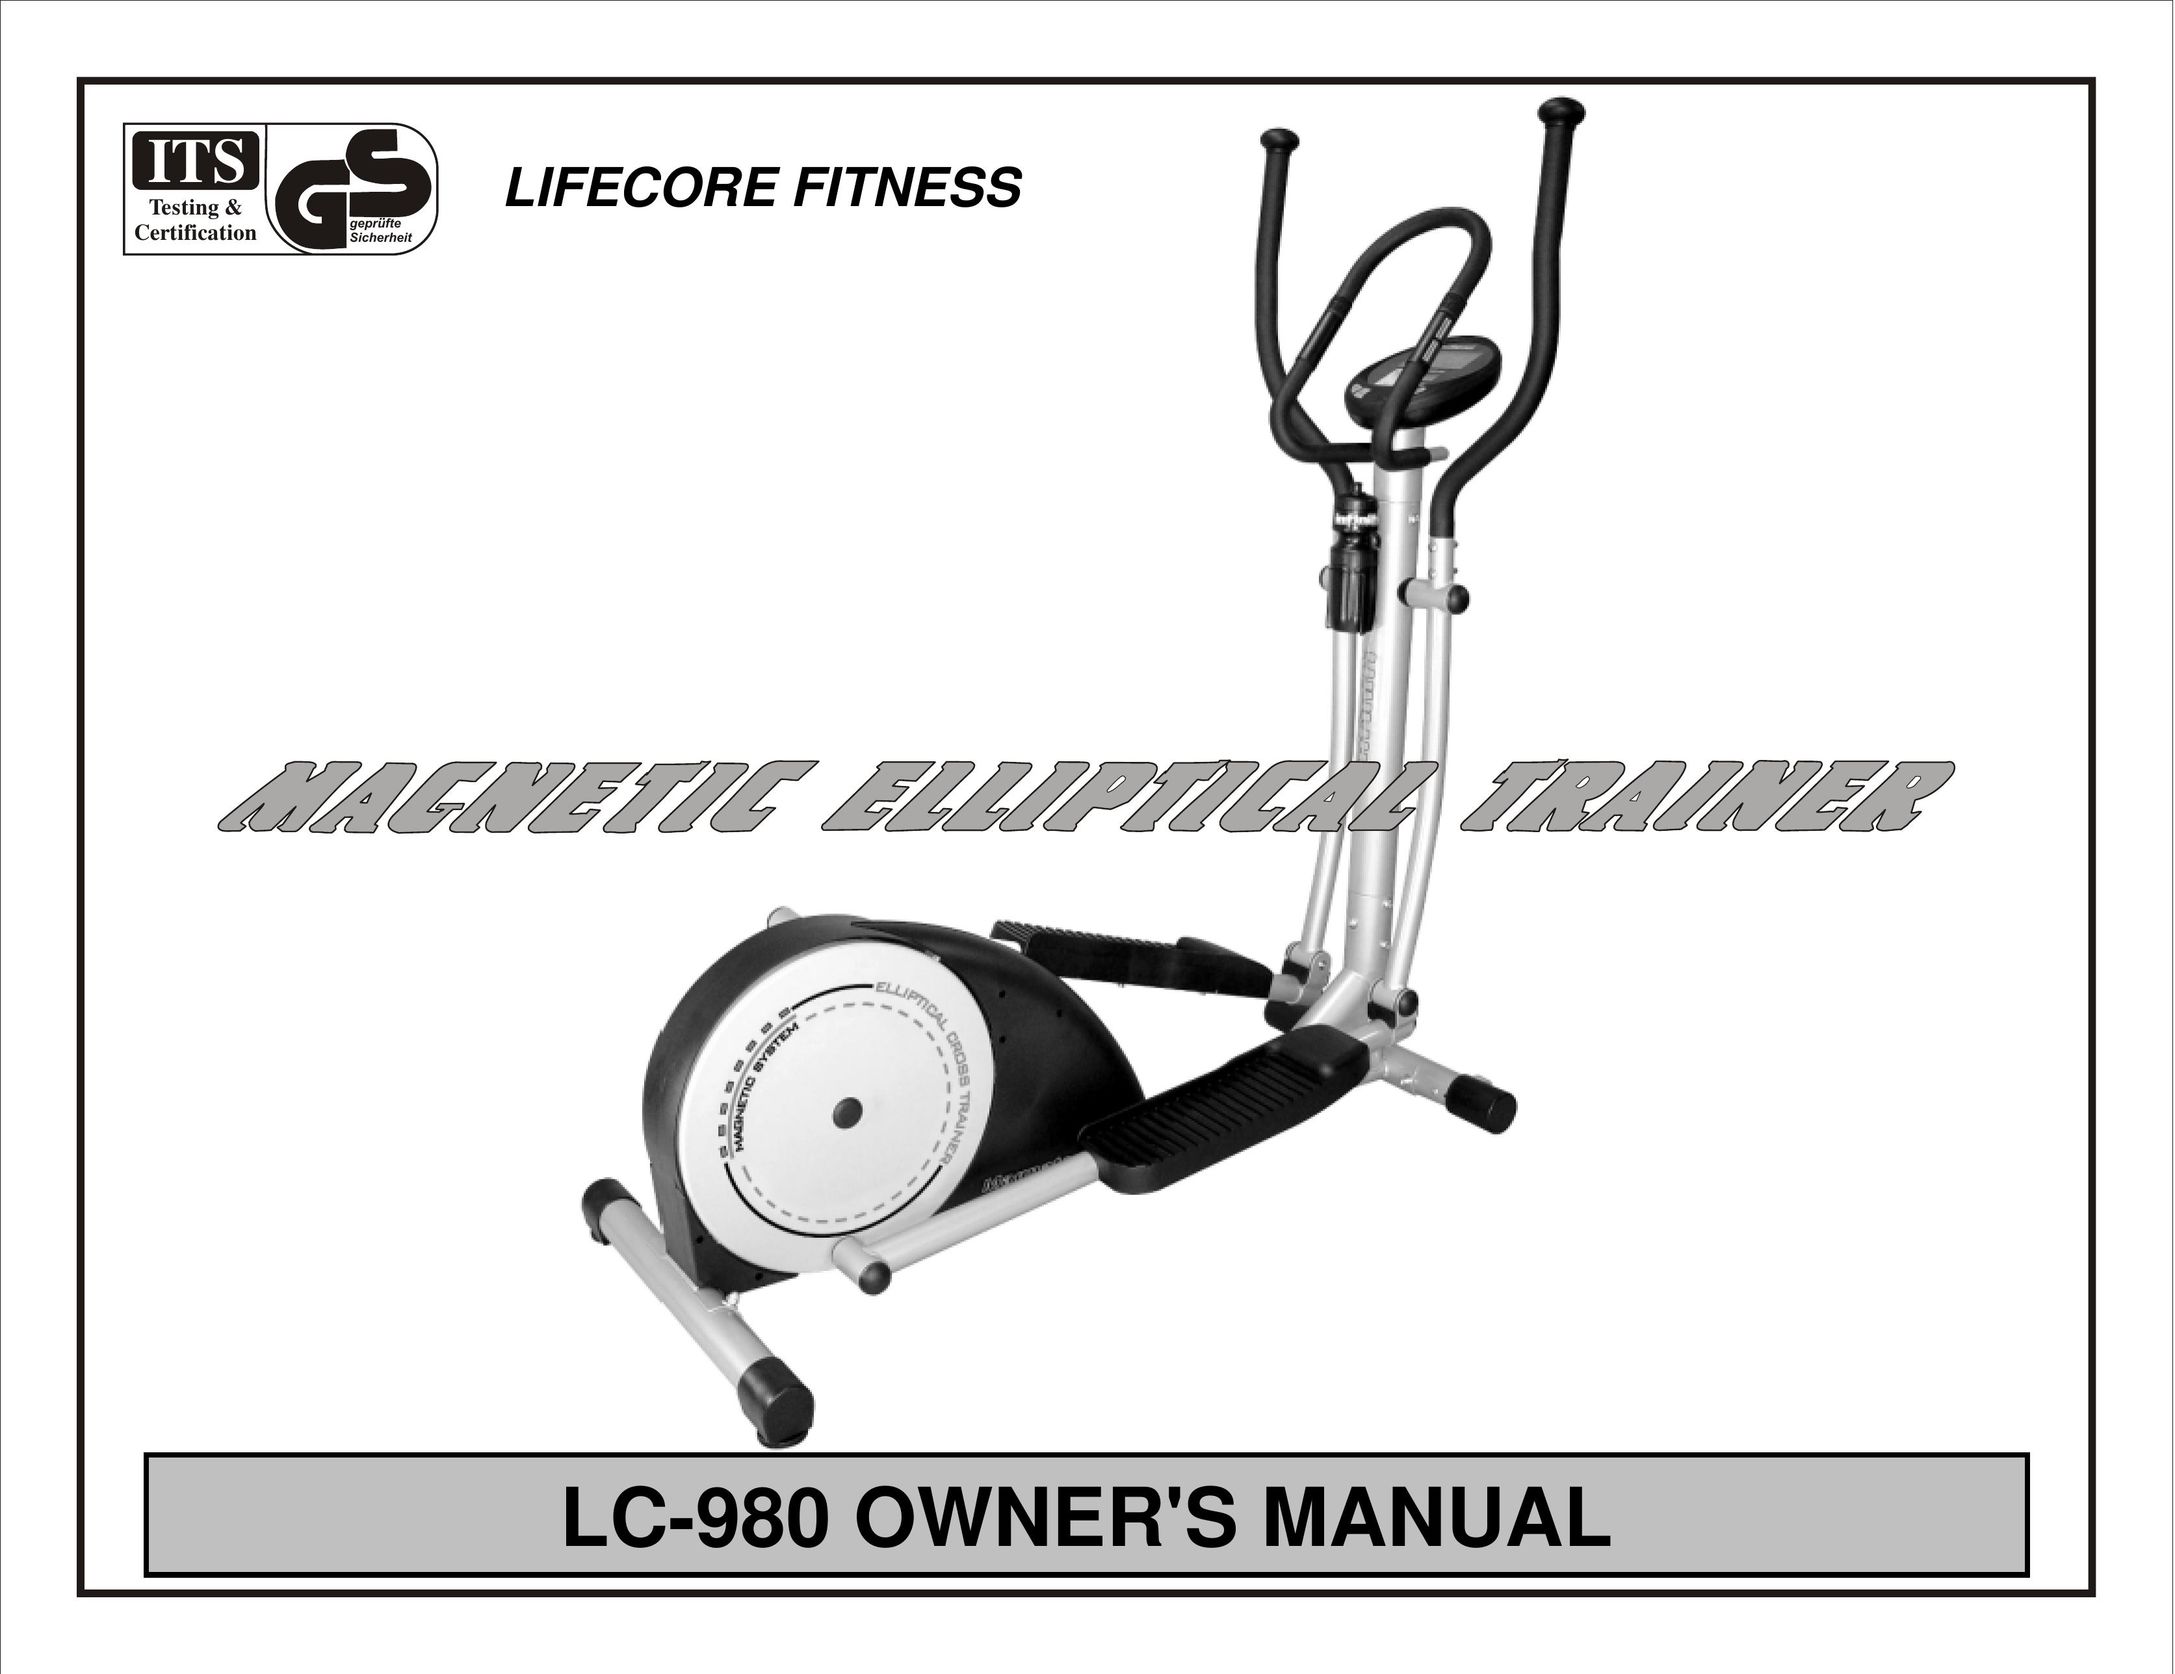 LifeCore Fitness LC-980 Home Gym User Manual